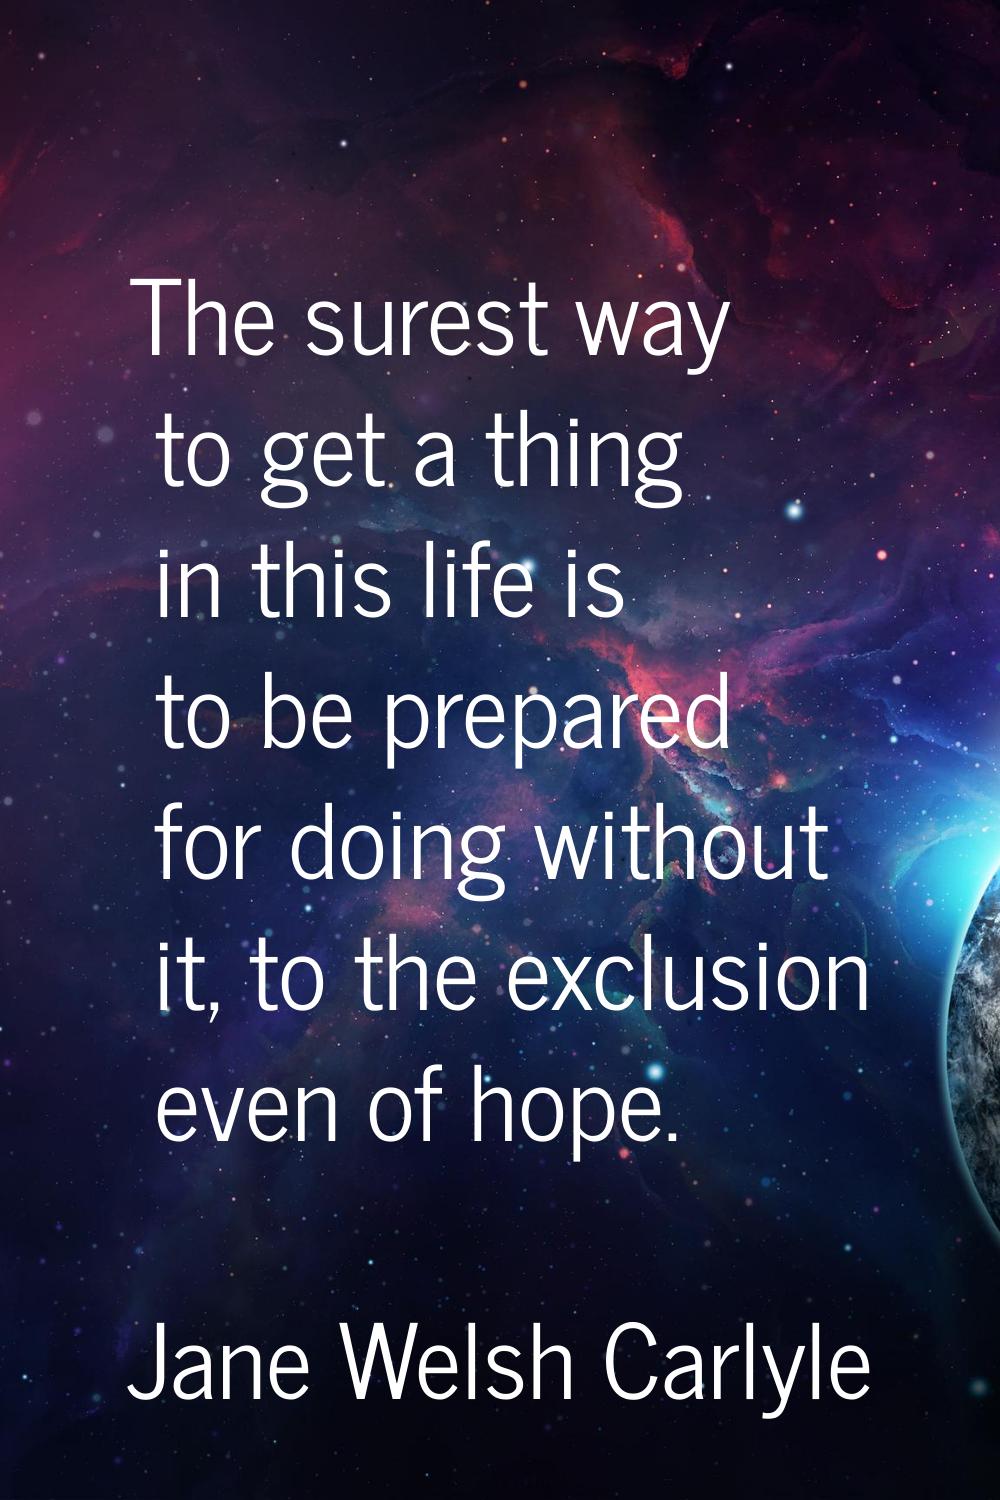 The surest way to get a thing in this life is to be prepared for doing without it, to the exclusion